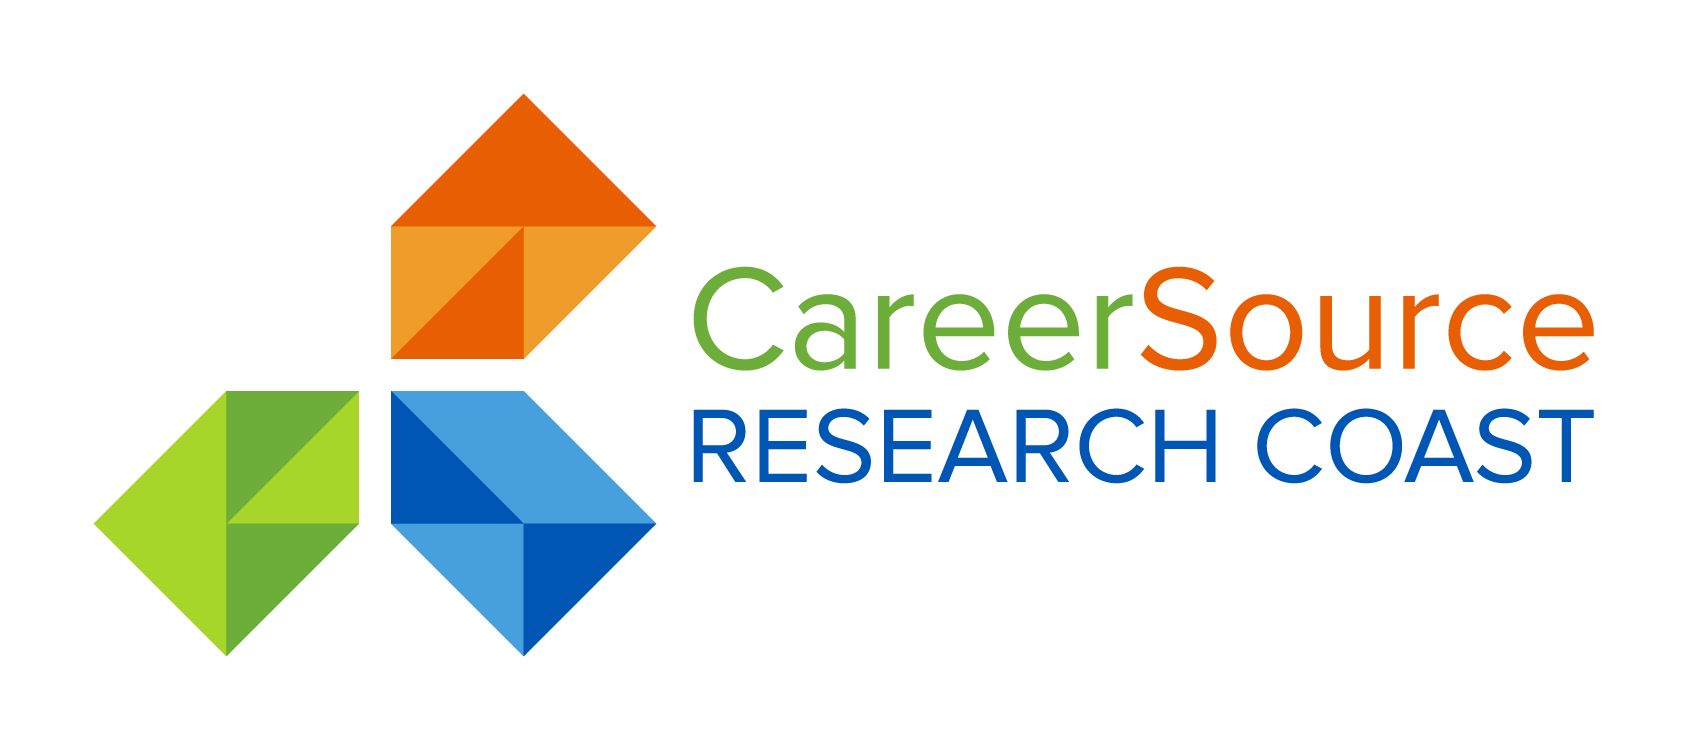 CareerSource Research Coast logo